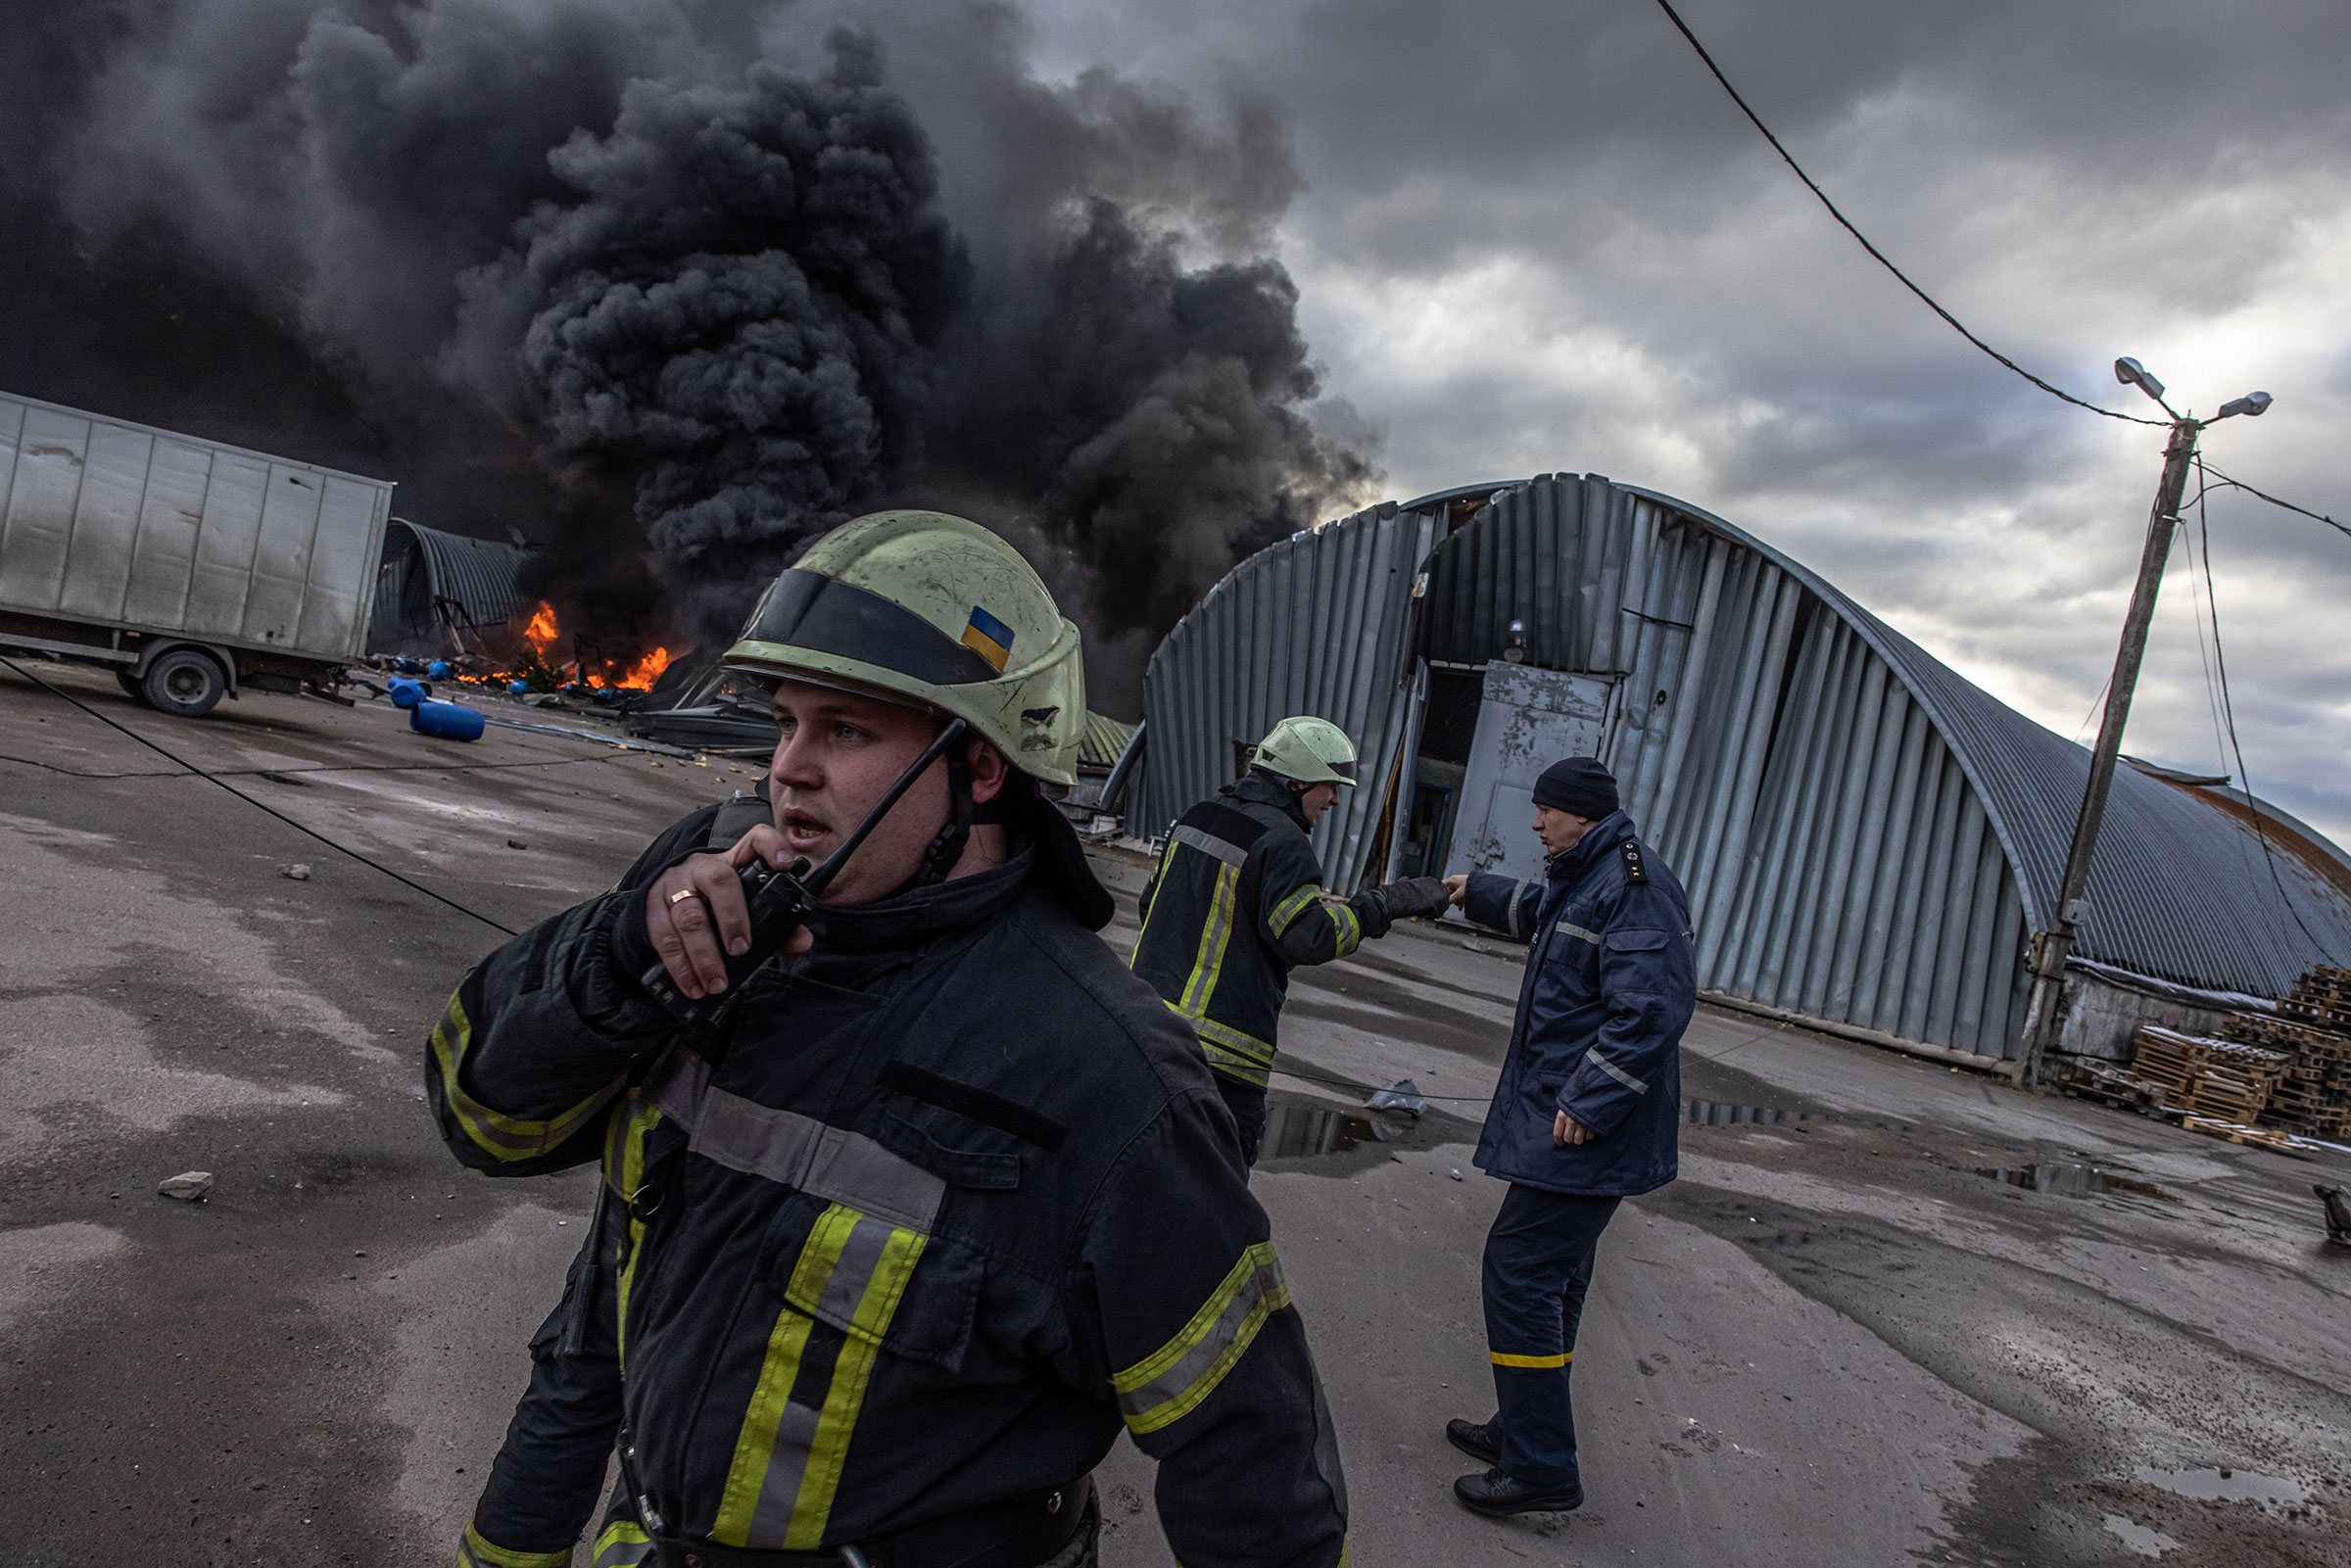 Firefighters try to extinguish a fire at a storage area holding chemicals which was shelled, on the outskirts of Brovary on March 8. (Roman Pilipey—EPA-EFE/Shutterstock)